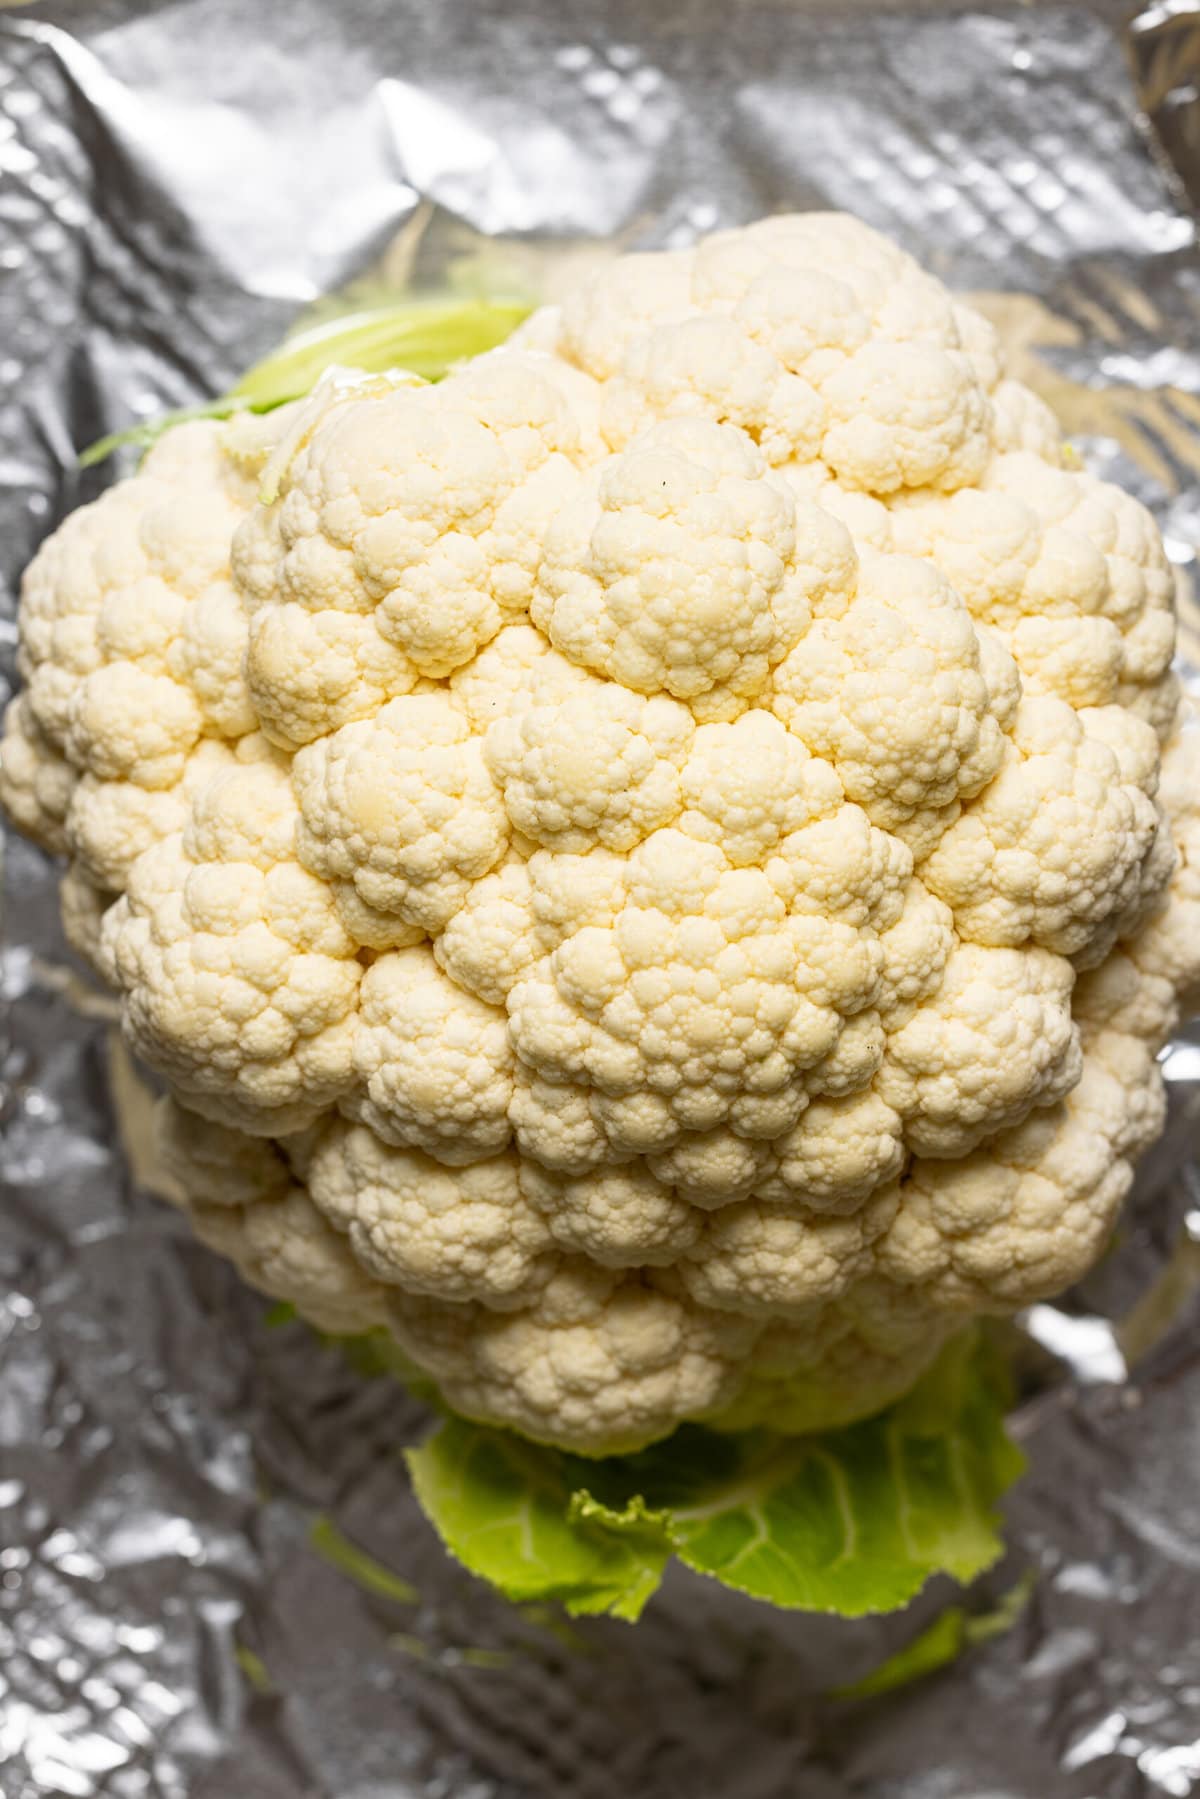 Whole cauliflower on a baking sheet lined with foil paper.